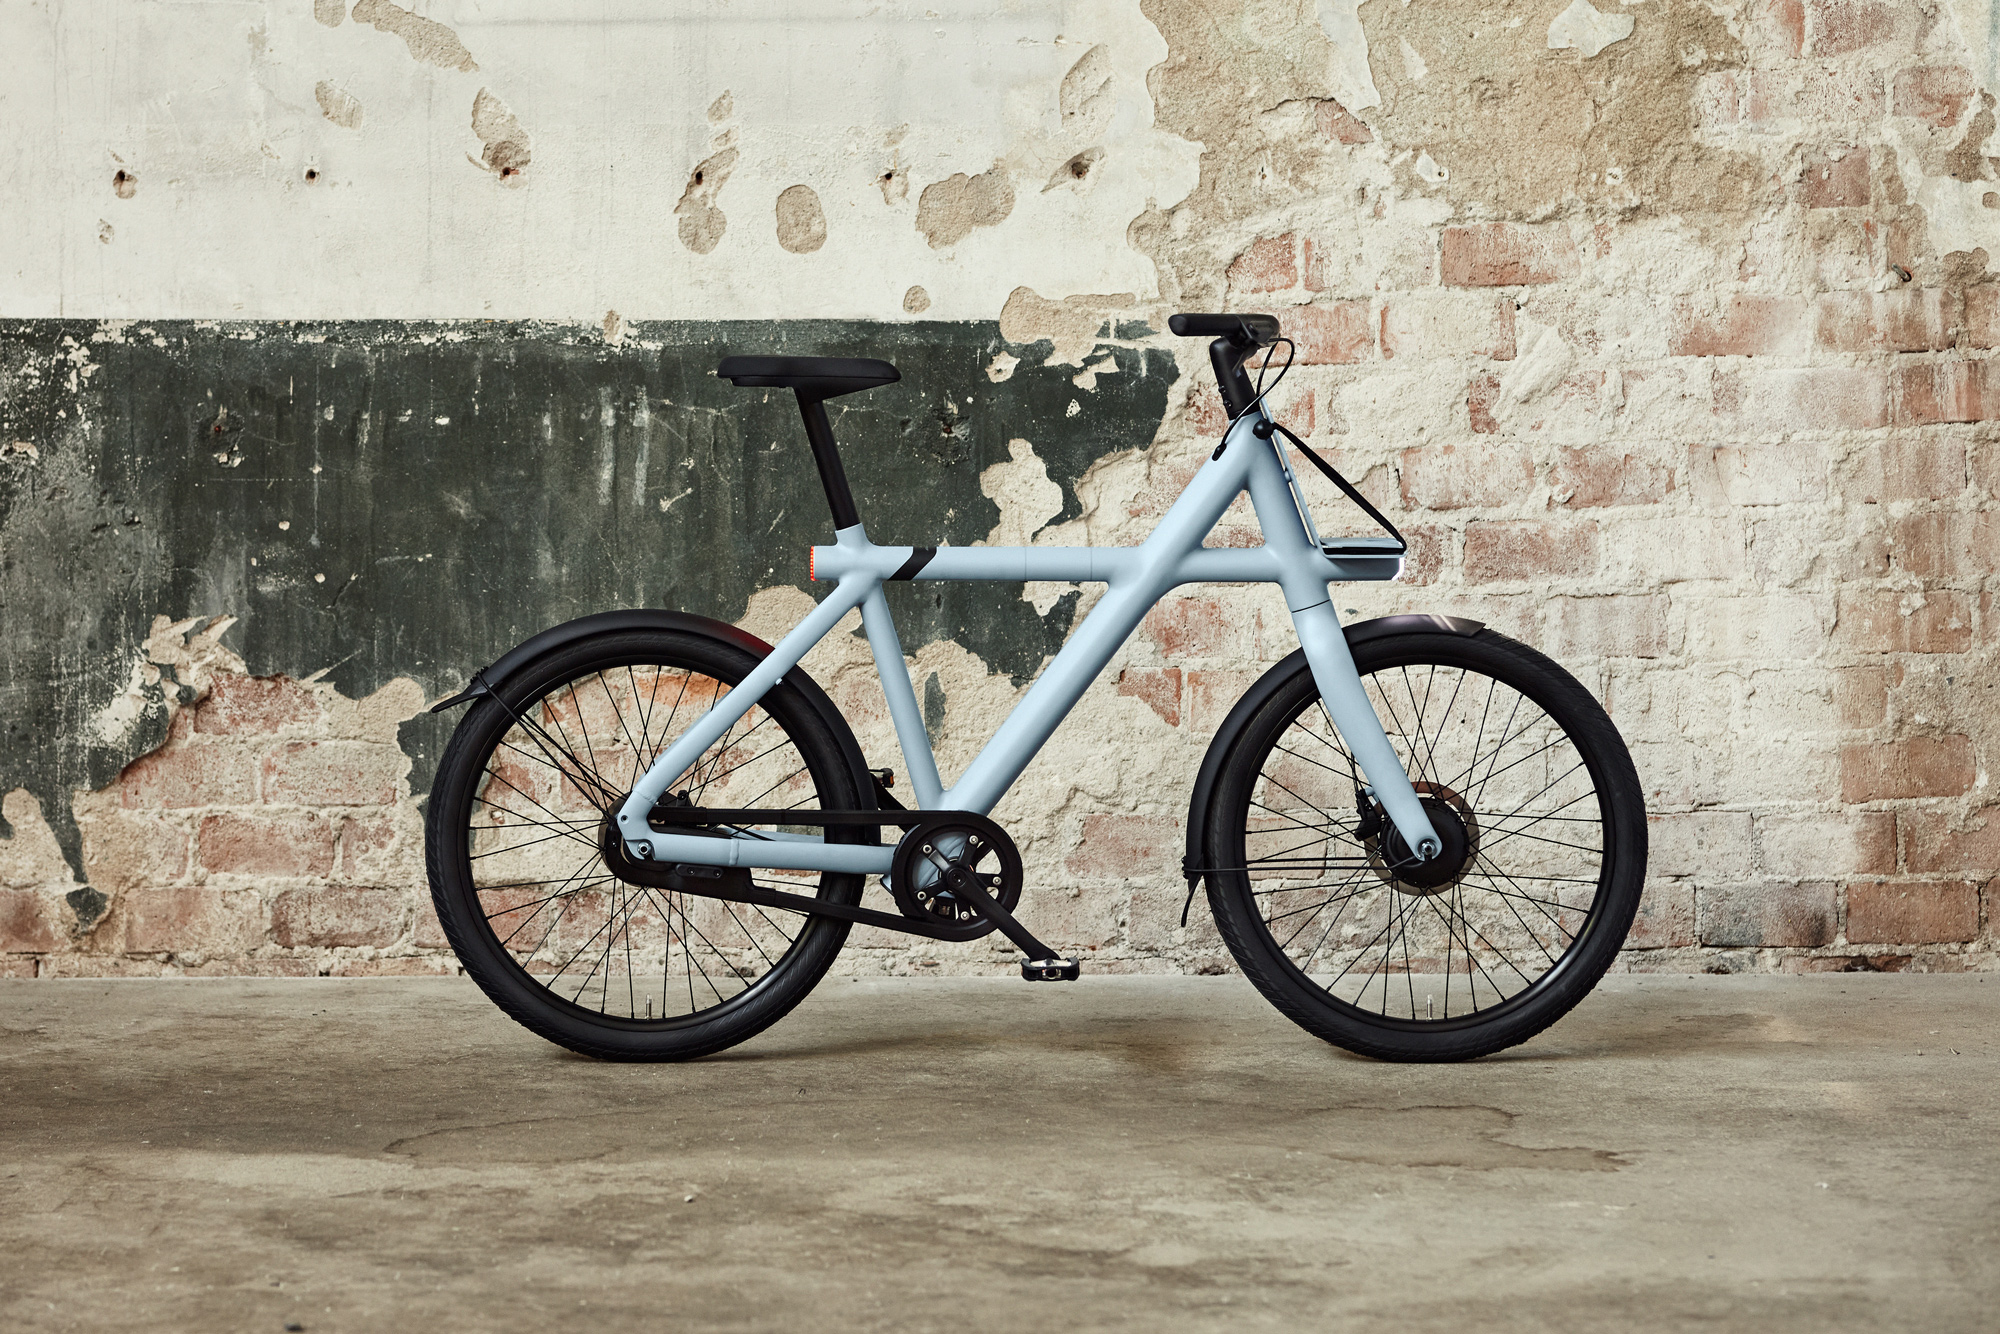 The VanMoof X3 electric bicycle.